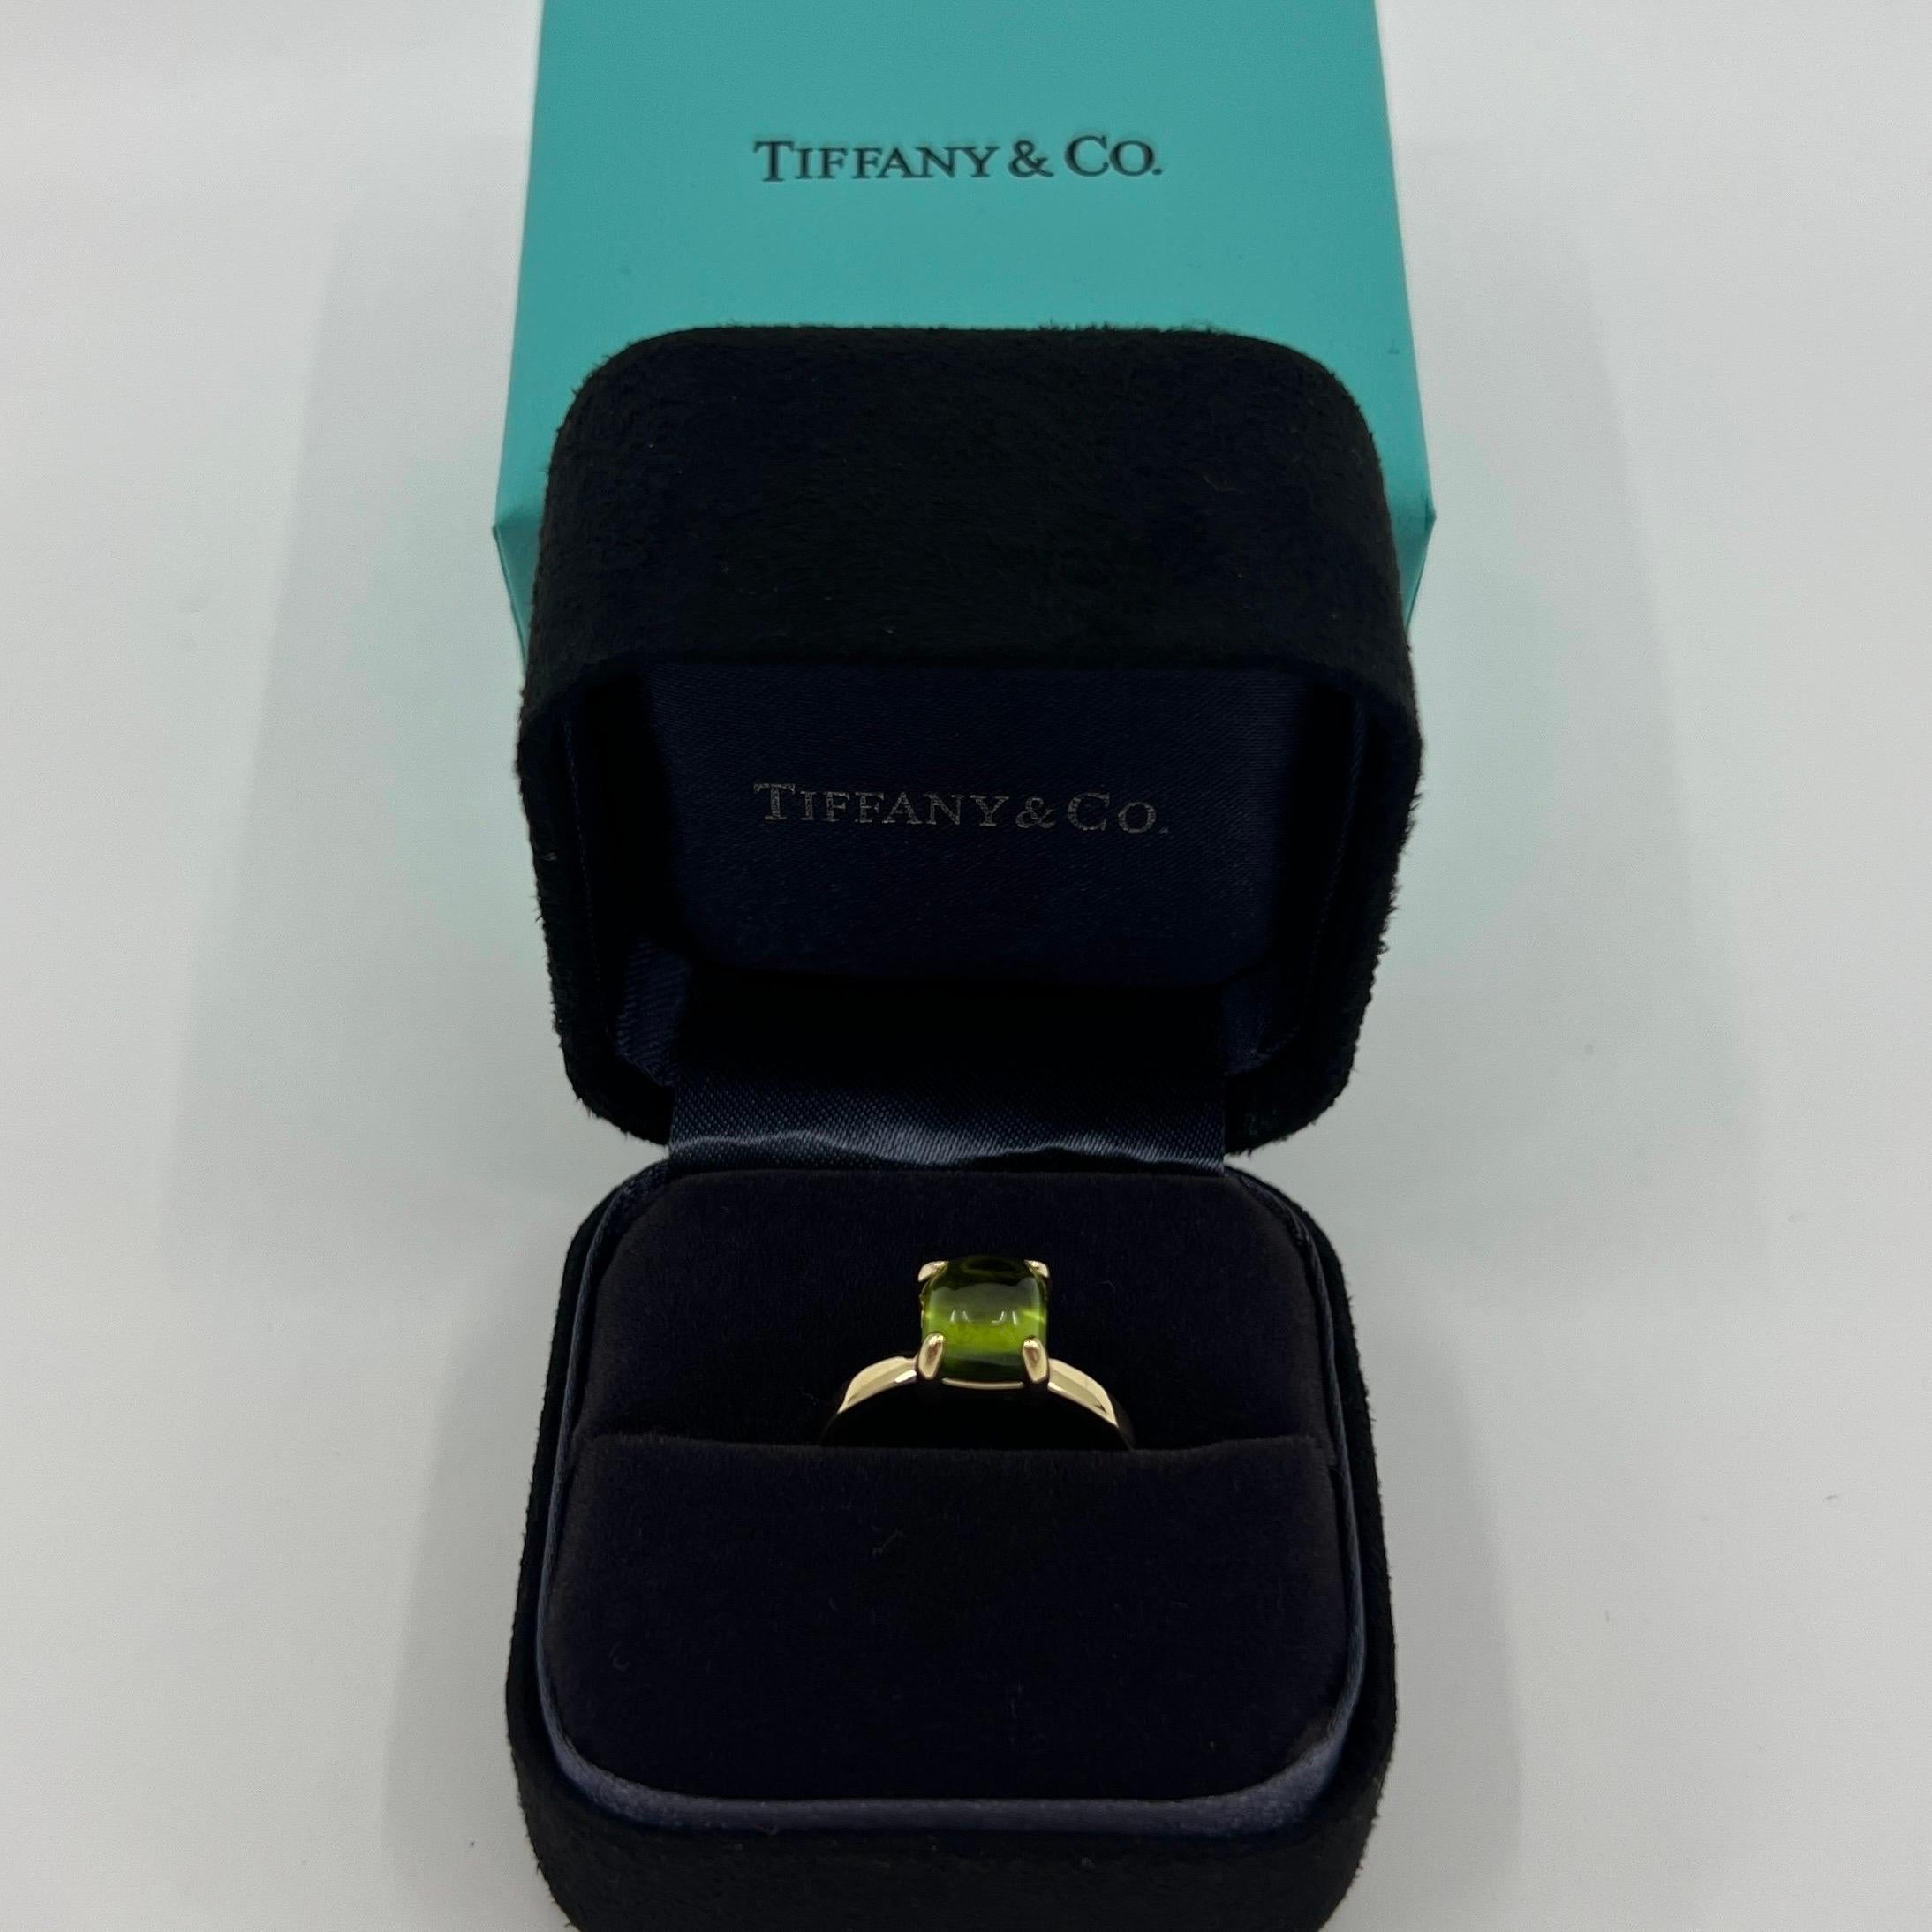 Rare Vintage Tiffany & Co. Paloma Picasso Green Peridot Sugar Stack 18k Yellow Gold Ring.

A beautiful and rare sugarloaf green peridot ring from the Tiffany & Co Paloma Picasso collection.

Fine jewellery houses like Tiffany only use the finest